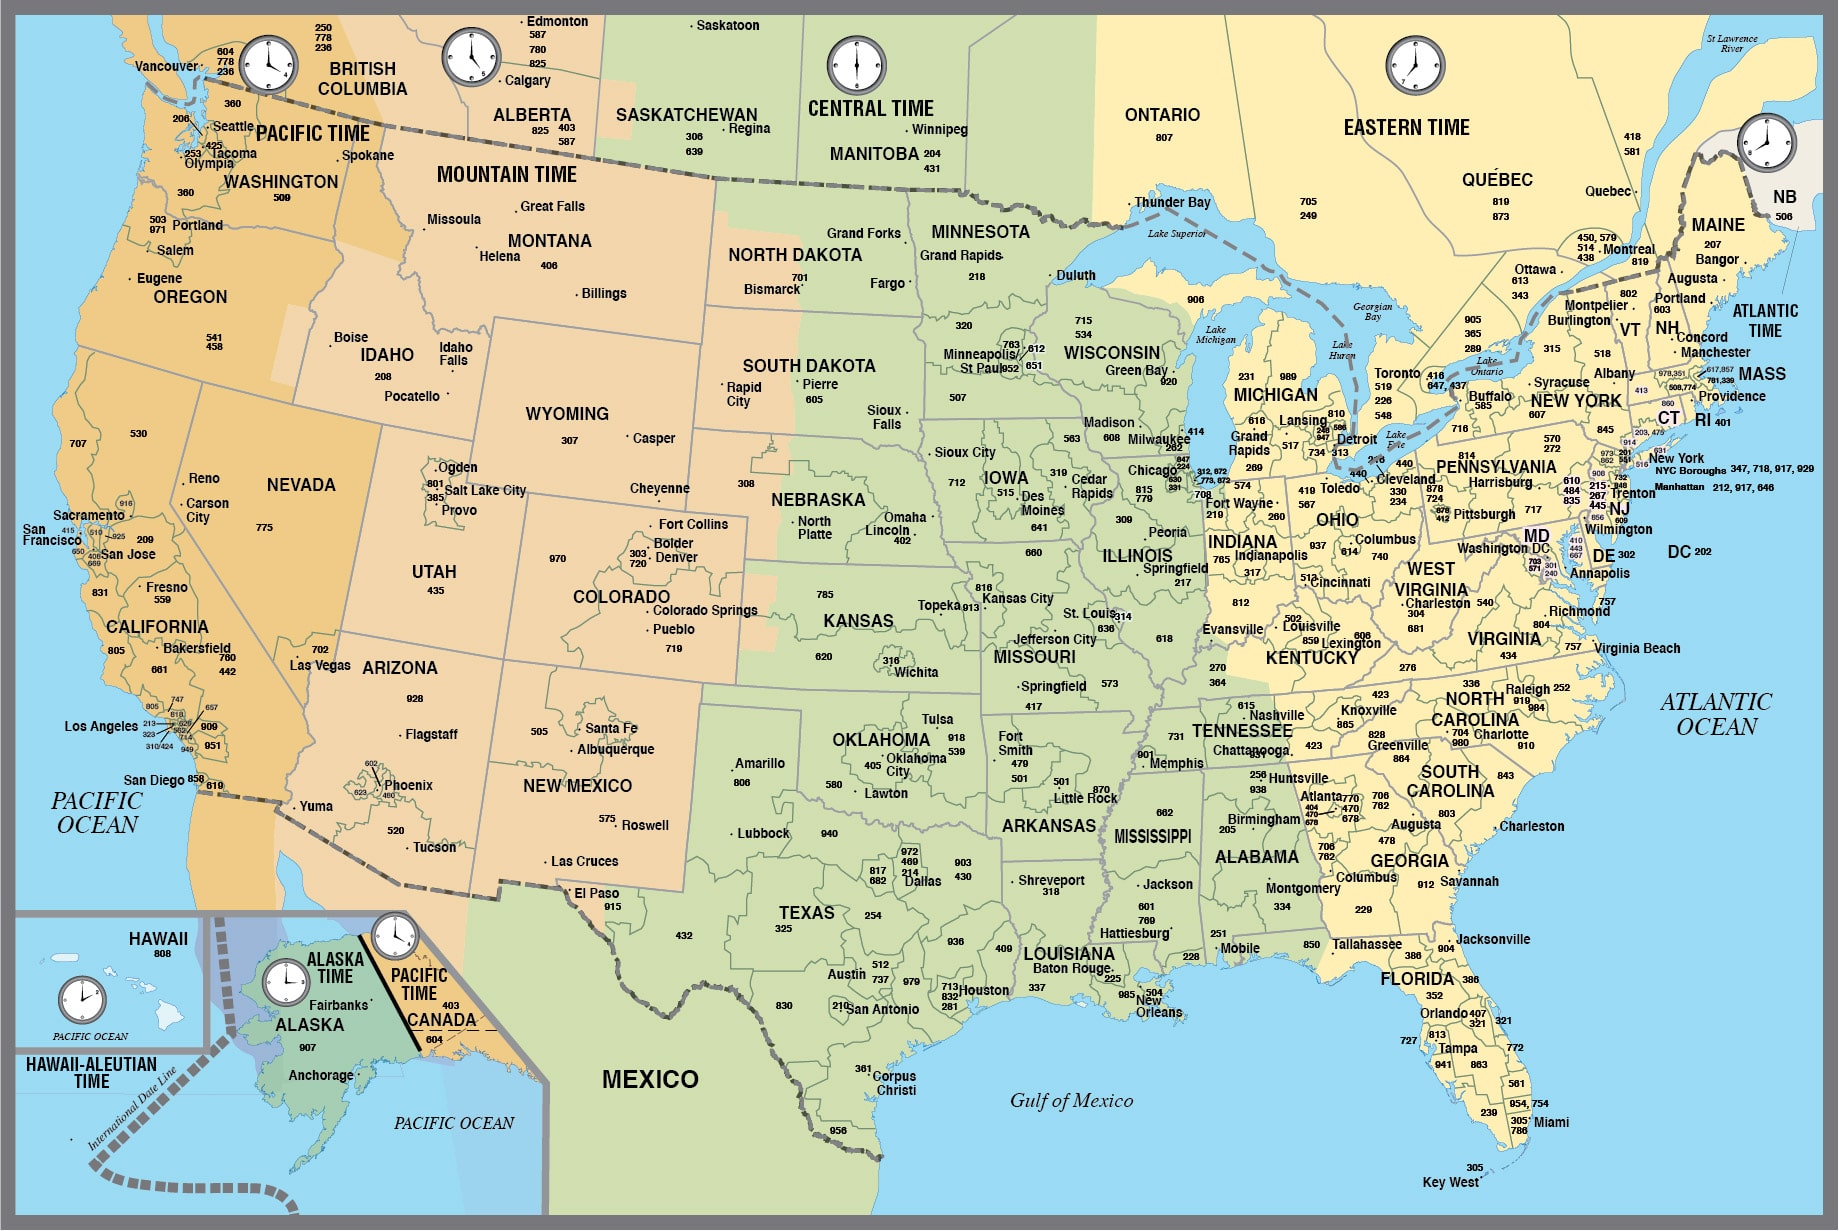 Royalty-Free, Fully-Editable & High-Res Digital USA Area Codes Maps...